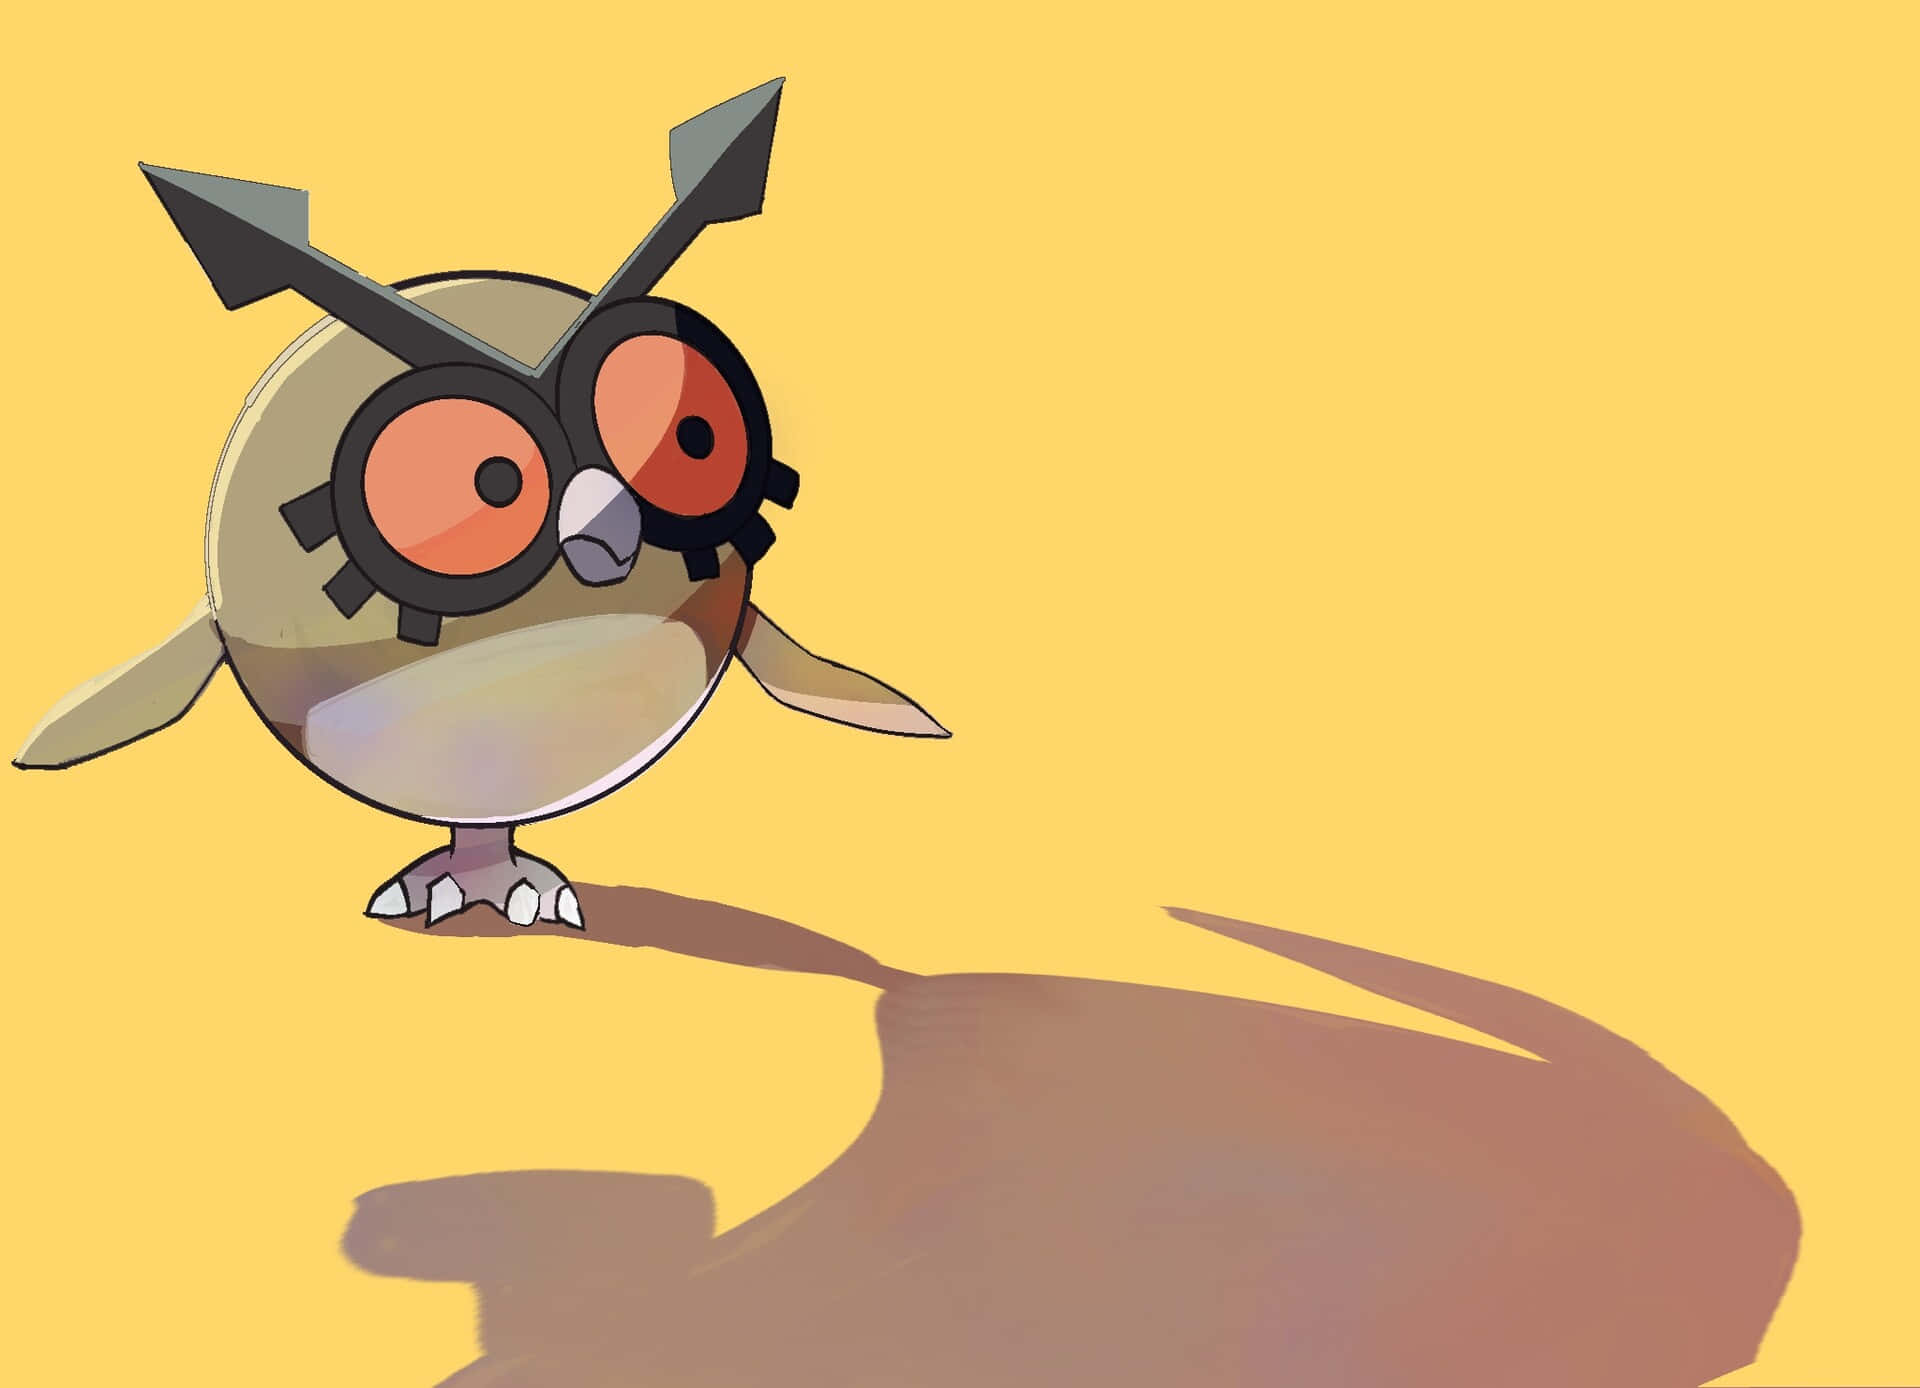 Hoothoot (Pokemon) HD Wallpapers and Backgrounds